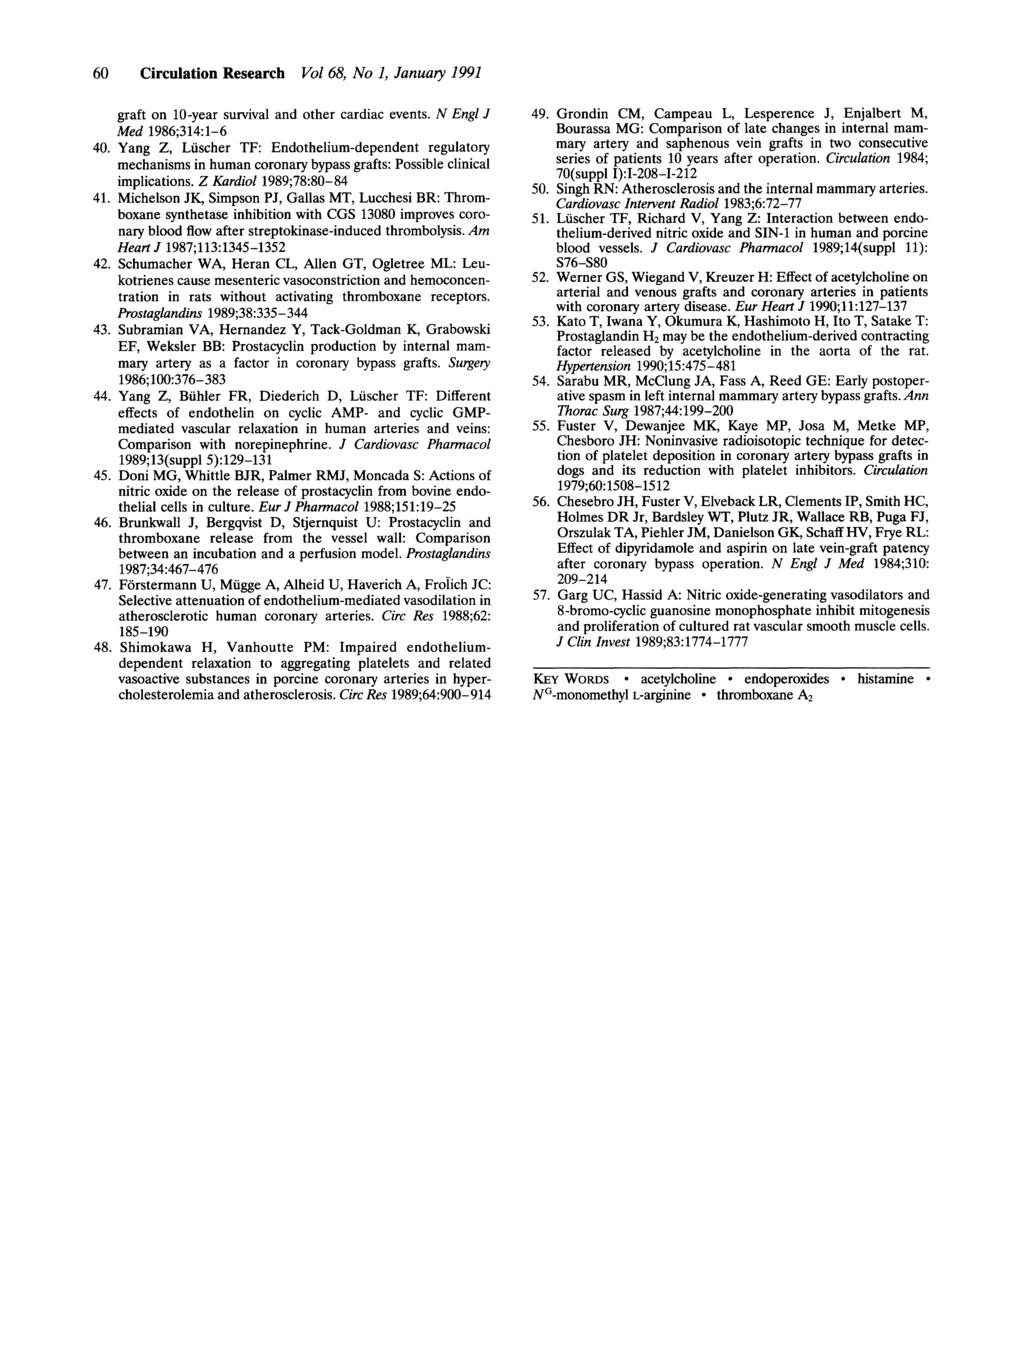 Downloaded from http://irres.ahajournals.org/ by guest on April 7, 218 6 Cirulation Researh Vol 68, No 1, January 1991 graft on 1-year survival and other ardia events. N Engl J Med 1986;314:1-6 4.